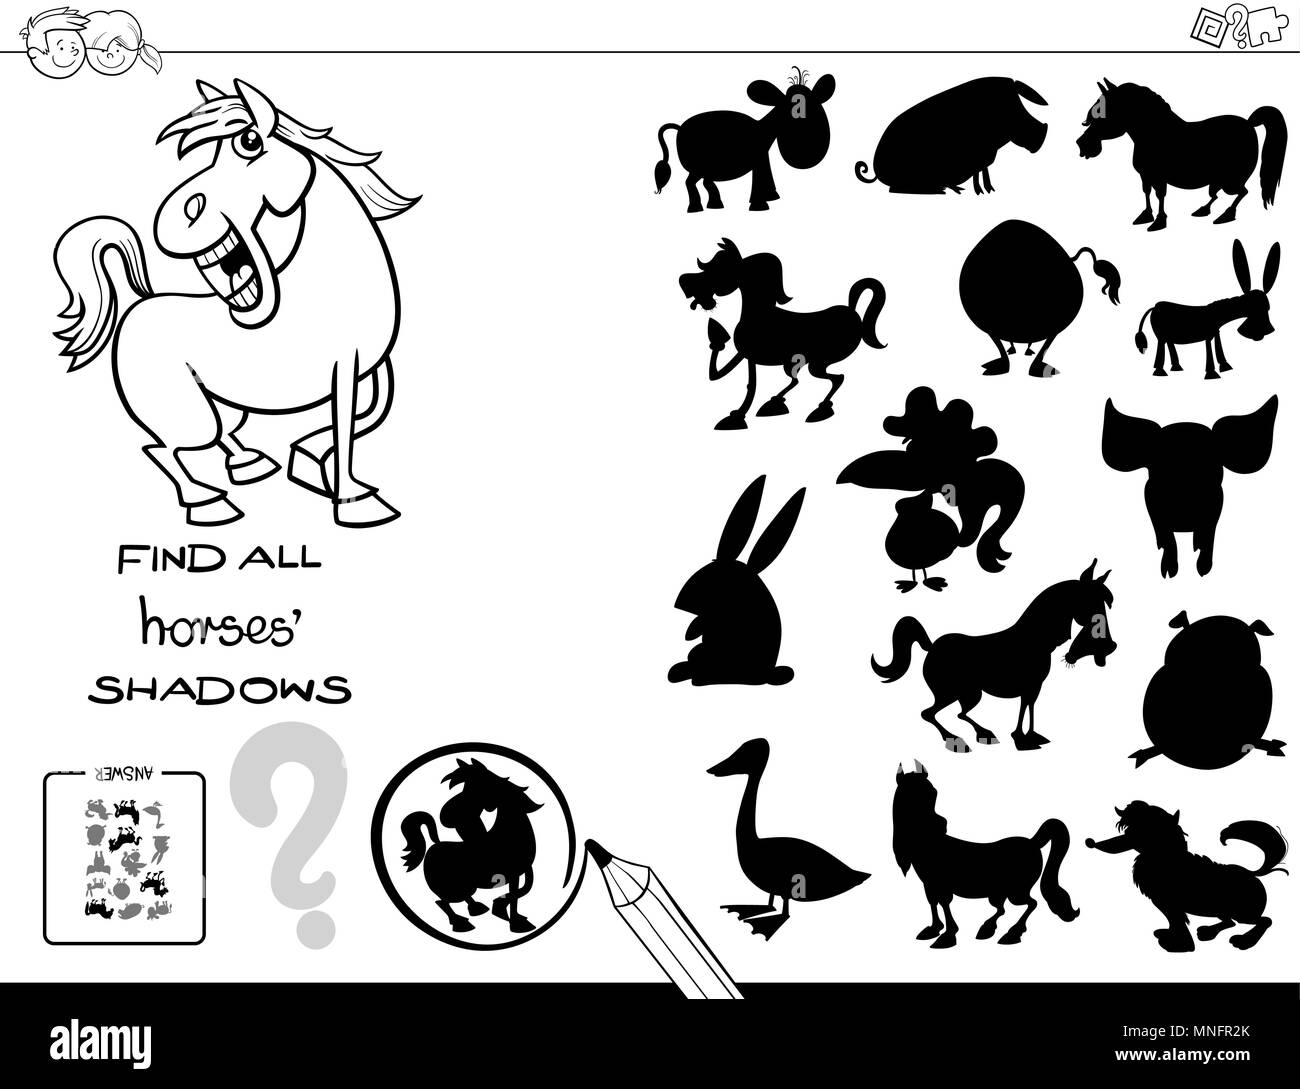 Black and White Cartoon Illustration of Finding All Horses Shadows Educational Activity for Children Coloring Book Stock Vector